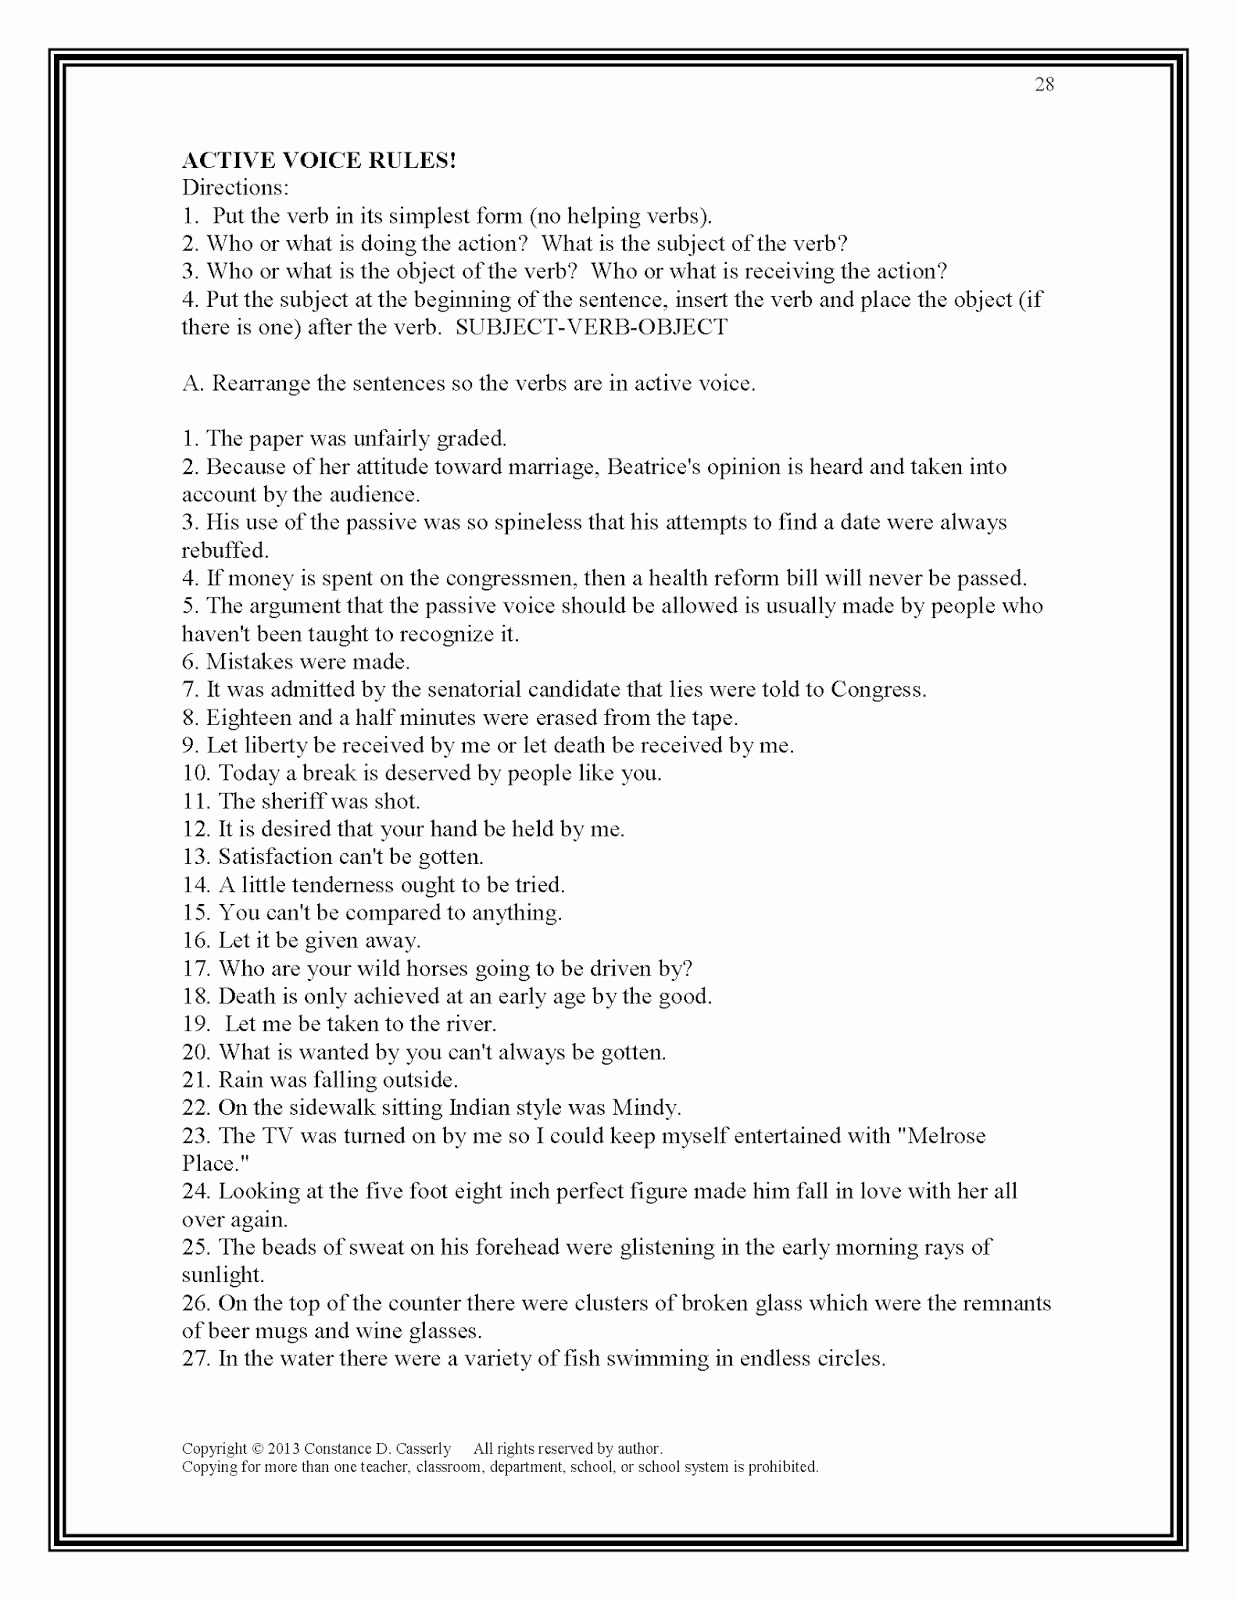 Preposition Worksheets Middle School New Prepositional Phrases Worksheet with Answer Key